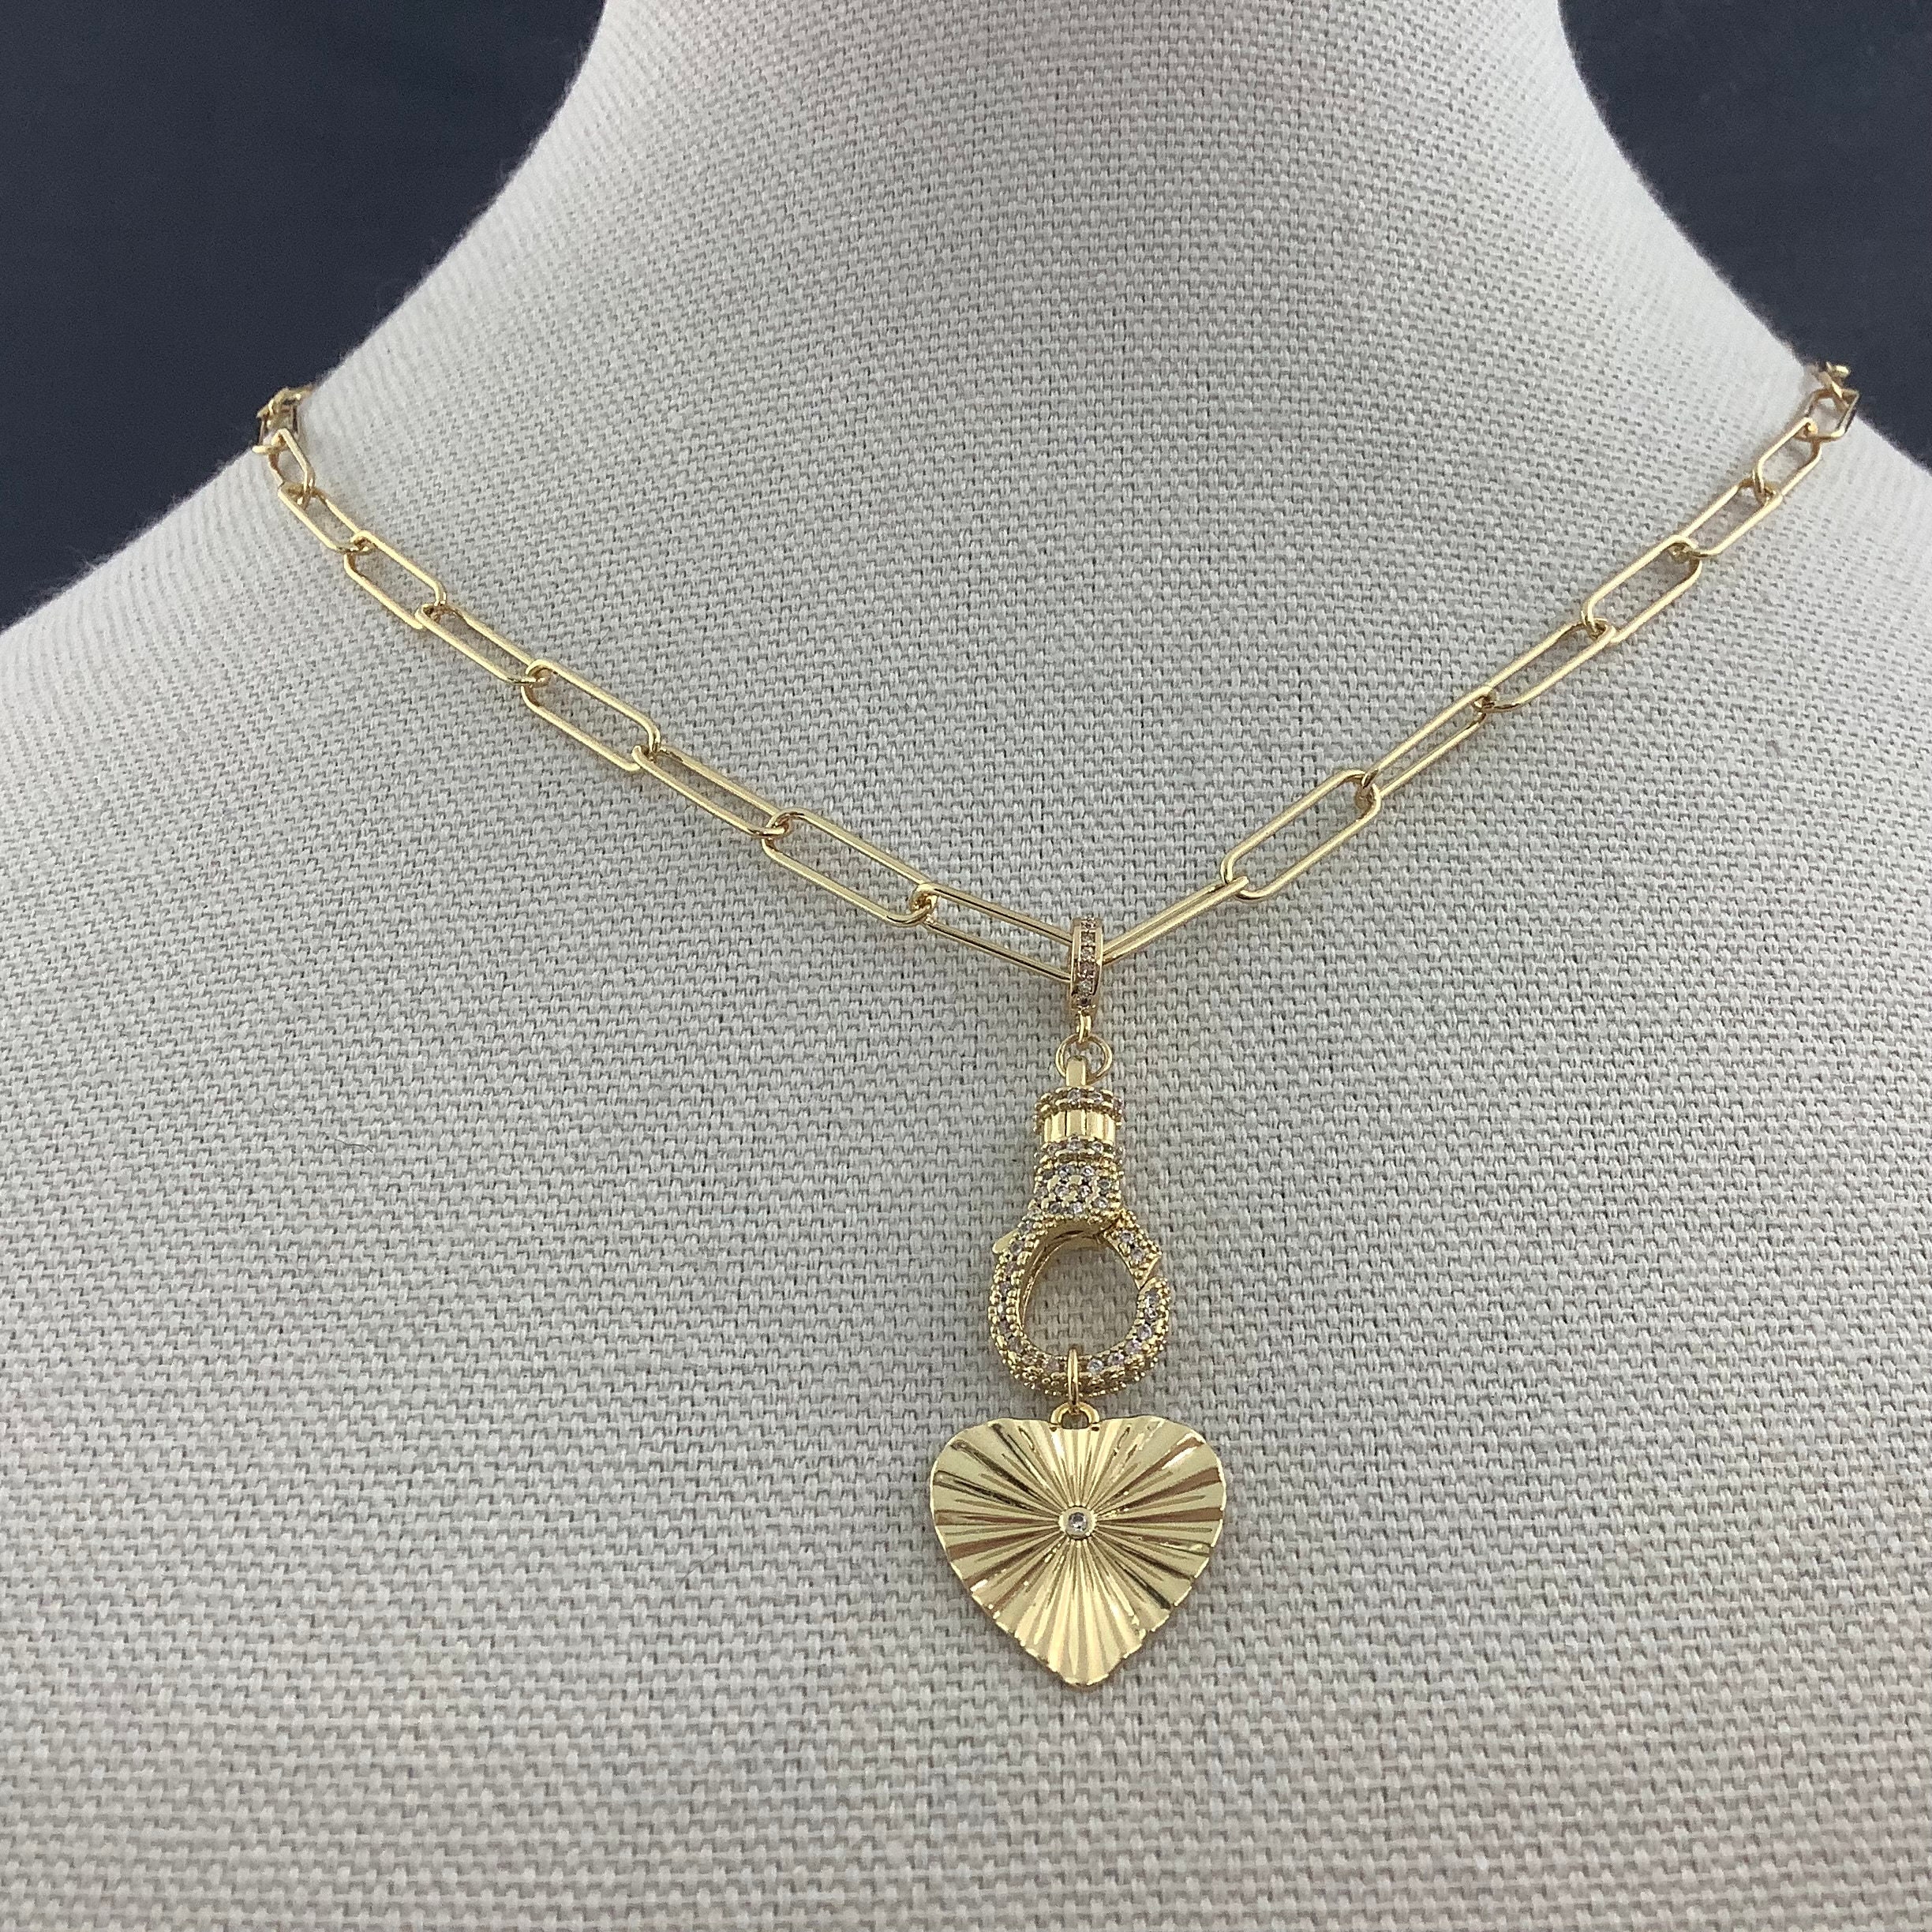 14K Solid Gold Fluted Heart Charm Necklace (Sunbeam Sunburst Style Fluted Detail Heart Pendant with Thin Paperclip Chain or Charm Alone)